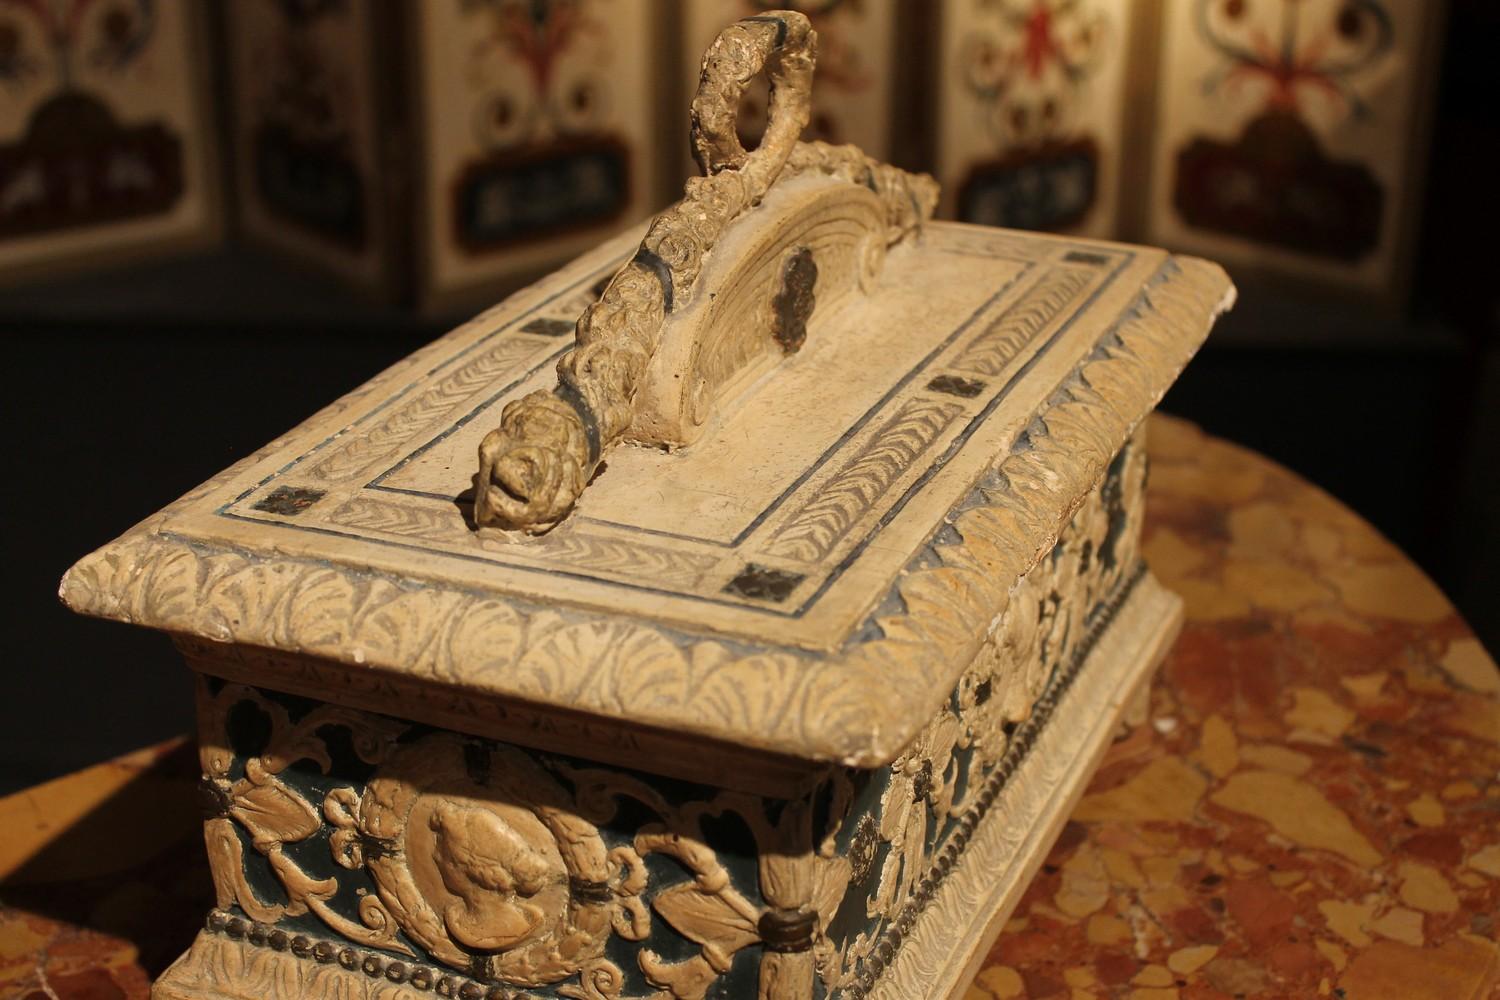 Italian 19th Century Renaissance Style Wood Lacquer and Painted Gesso Lidded Box For Sale 6